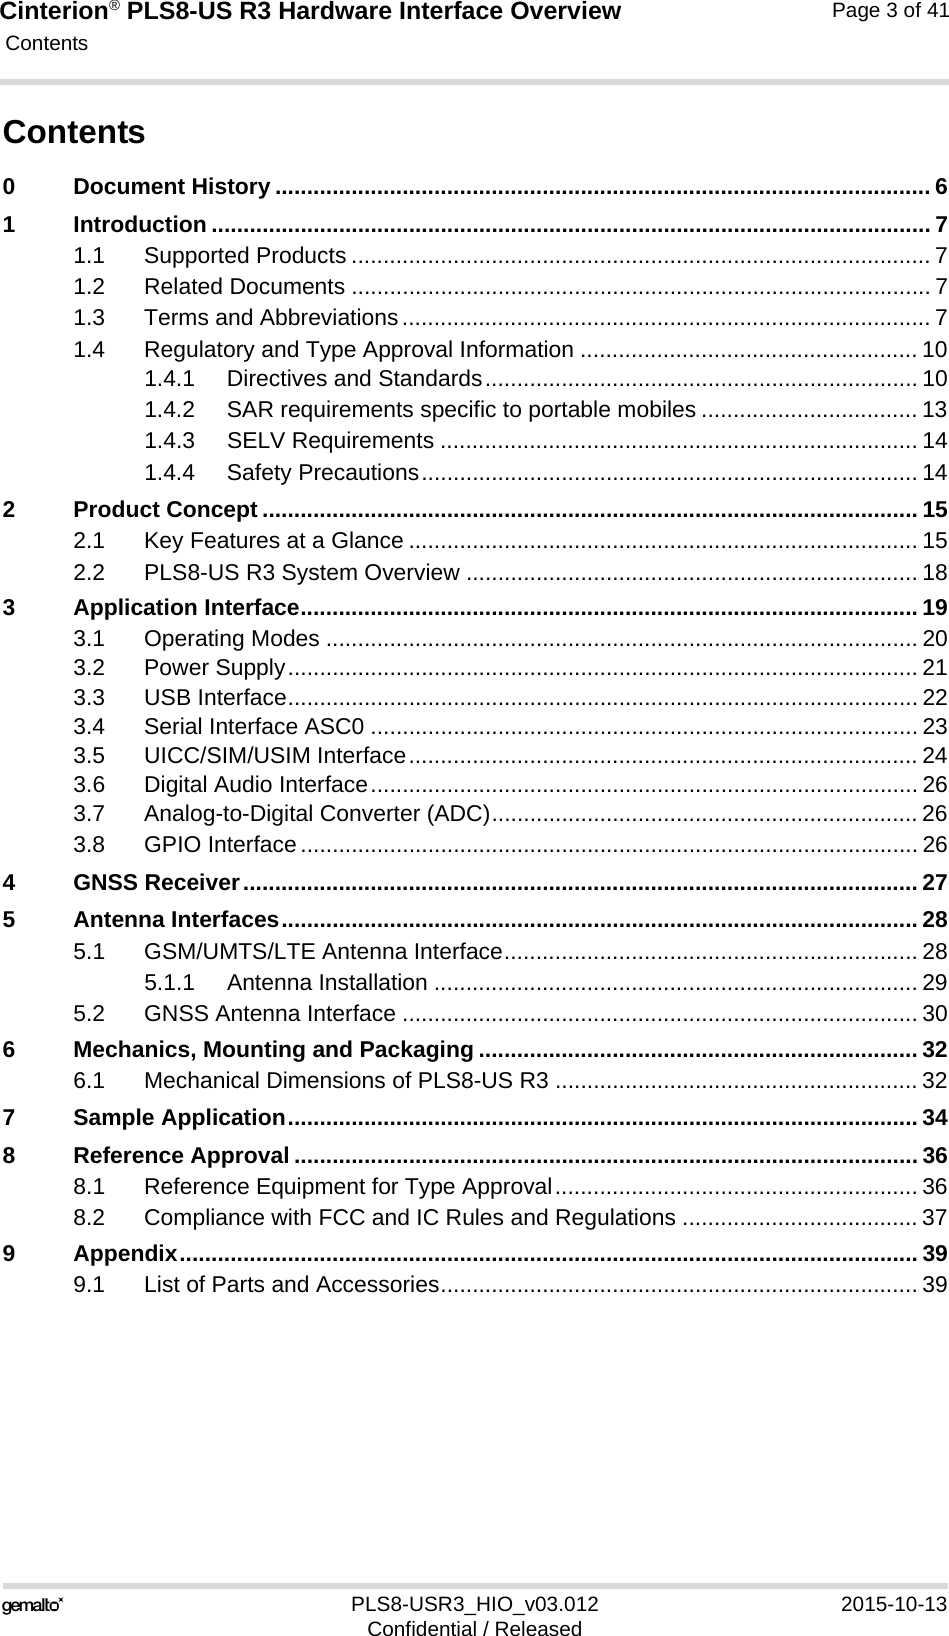 Cinterion® PLS8-US R3 Hardware Interface Overview Contents41PLS8-USR3_HIO_v03.012 2015-10-13Confidential / ReleasedPage 3 of 41Contents0 Document History ....................................................................................................... 61 Introduction ................................................................................................................. 71.1 Supported Products ........................................................................................... 71.2 Related Documents ........................................................................................... 71.3 Terms and Abbreviations................................................................................... 71.4 Regulatory and Type Approval Information ..................................................... 101.4.1 Directives and Standards.................................................................... 101.4.2 SAR requirements specific to portable mobiles .................................. 131.4.3 SELV Requirements ........................................................................... 141.4.4 Safety Precautions.............................................................................. 142 Product Concept ....................................................................................................... 152.1 Key Features at a Glance ................................................................................ 152.2 PLS8-US R3 System Overview ....................................................................... 183 Application Interface................................................................................................. 193.1 Operating Modes ............................................................................................. 203.2 Power Supply................................................................................................... 213.3 USB Interface................................................................................................... 223.4 Serial Interface ASC0 ...................................................................................... 233.5 UICC/SIM/USIM Interface................................................................................ 243.6 Digital Audio Interface...................................................................................... 263.7 Analog-to-Digital Converter (ADC)................................................................... 263.8 GPIO Interface................................................................................................. 264 GNSS Receiver.......................................................................................................... 275 Antenna Interfaces.................................................................................................... 285.1 GSM/UMTS/LTE Antenna Interface................................................................. 285.1.1 Antenna Installation ............................................................................ 295.2 GNSS Antenna Interface ................................................................................. 306 Mechanics, Mounting and Packaging ..................................................................... 326.1 Mechanical Dimensions of PLS8-US R3 ......................................................... 327 Sample Application................................................................................................... 348 Reference Approval .................................................................................................. 368.1 Reference Equipment for Type Approval......................................................... 368.2 Compliance with FCC and IC Rules and Regulations ..................................... 379 Appendix.................................................................................................................... 399.1 List of Parts and Accessories........................................................................... 39